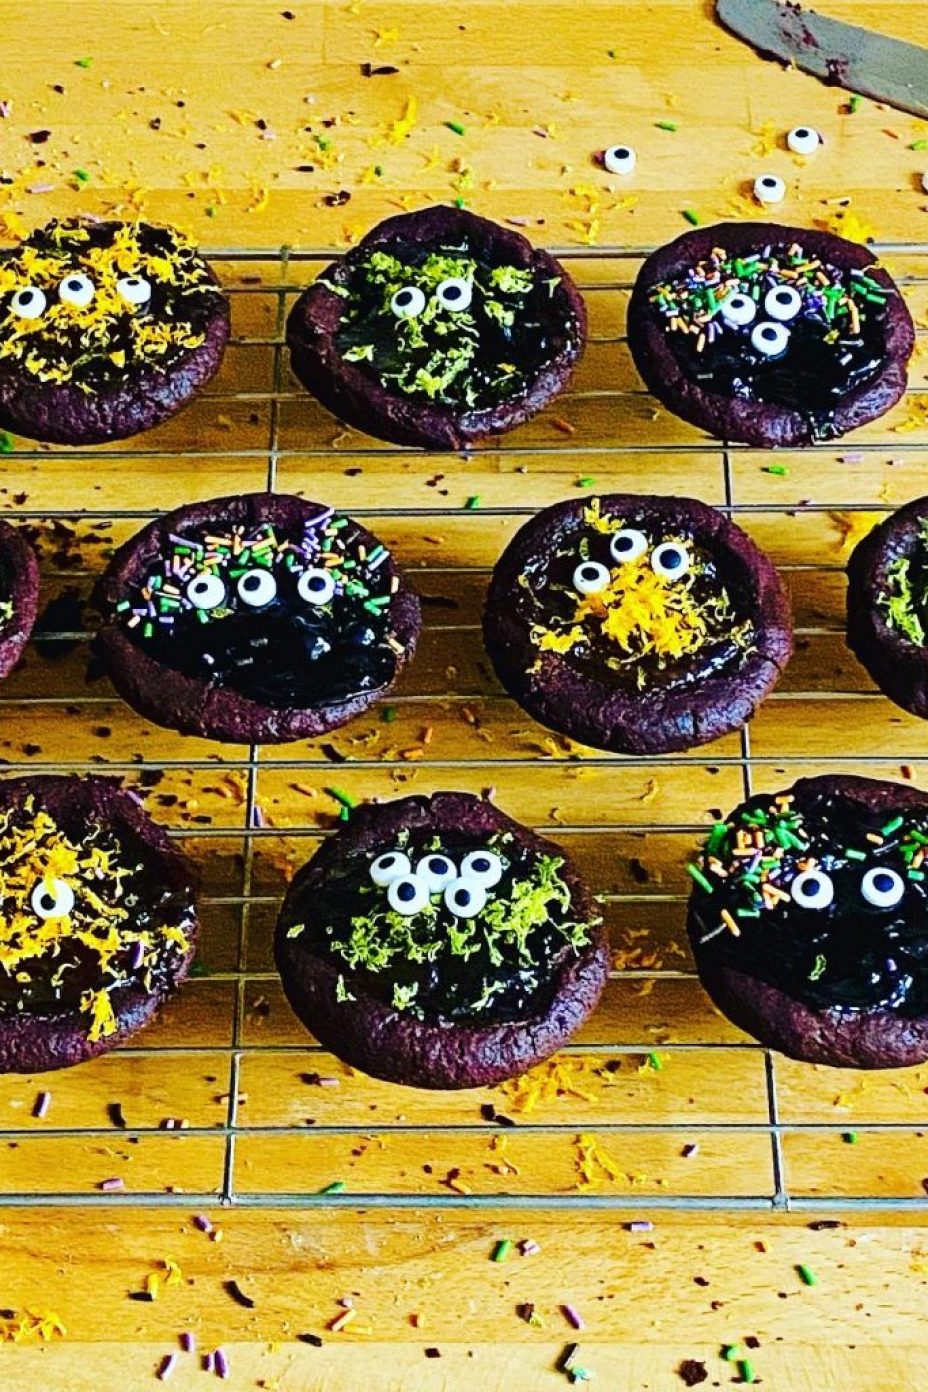 Monster cookie cups filled with jam and marmalades, topped with icing eyes, sprinkles and orange and lime zest